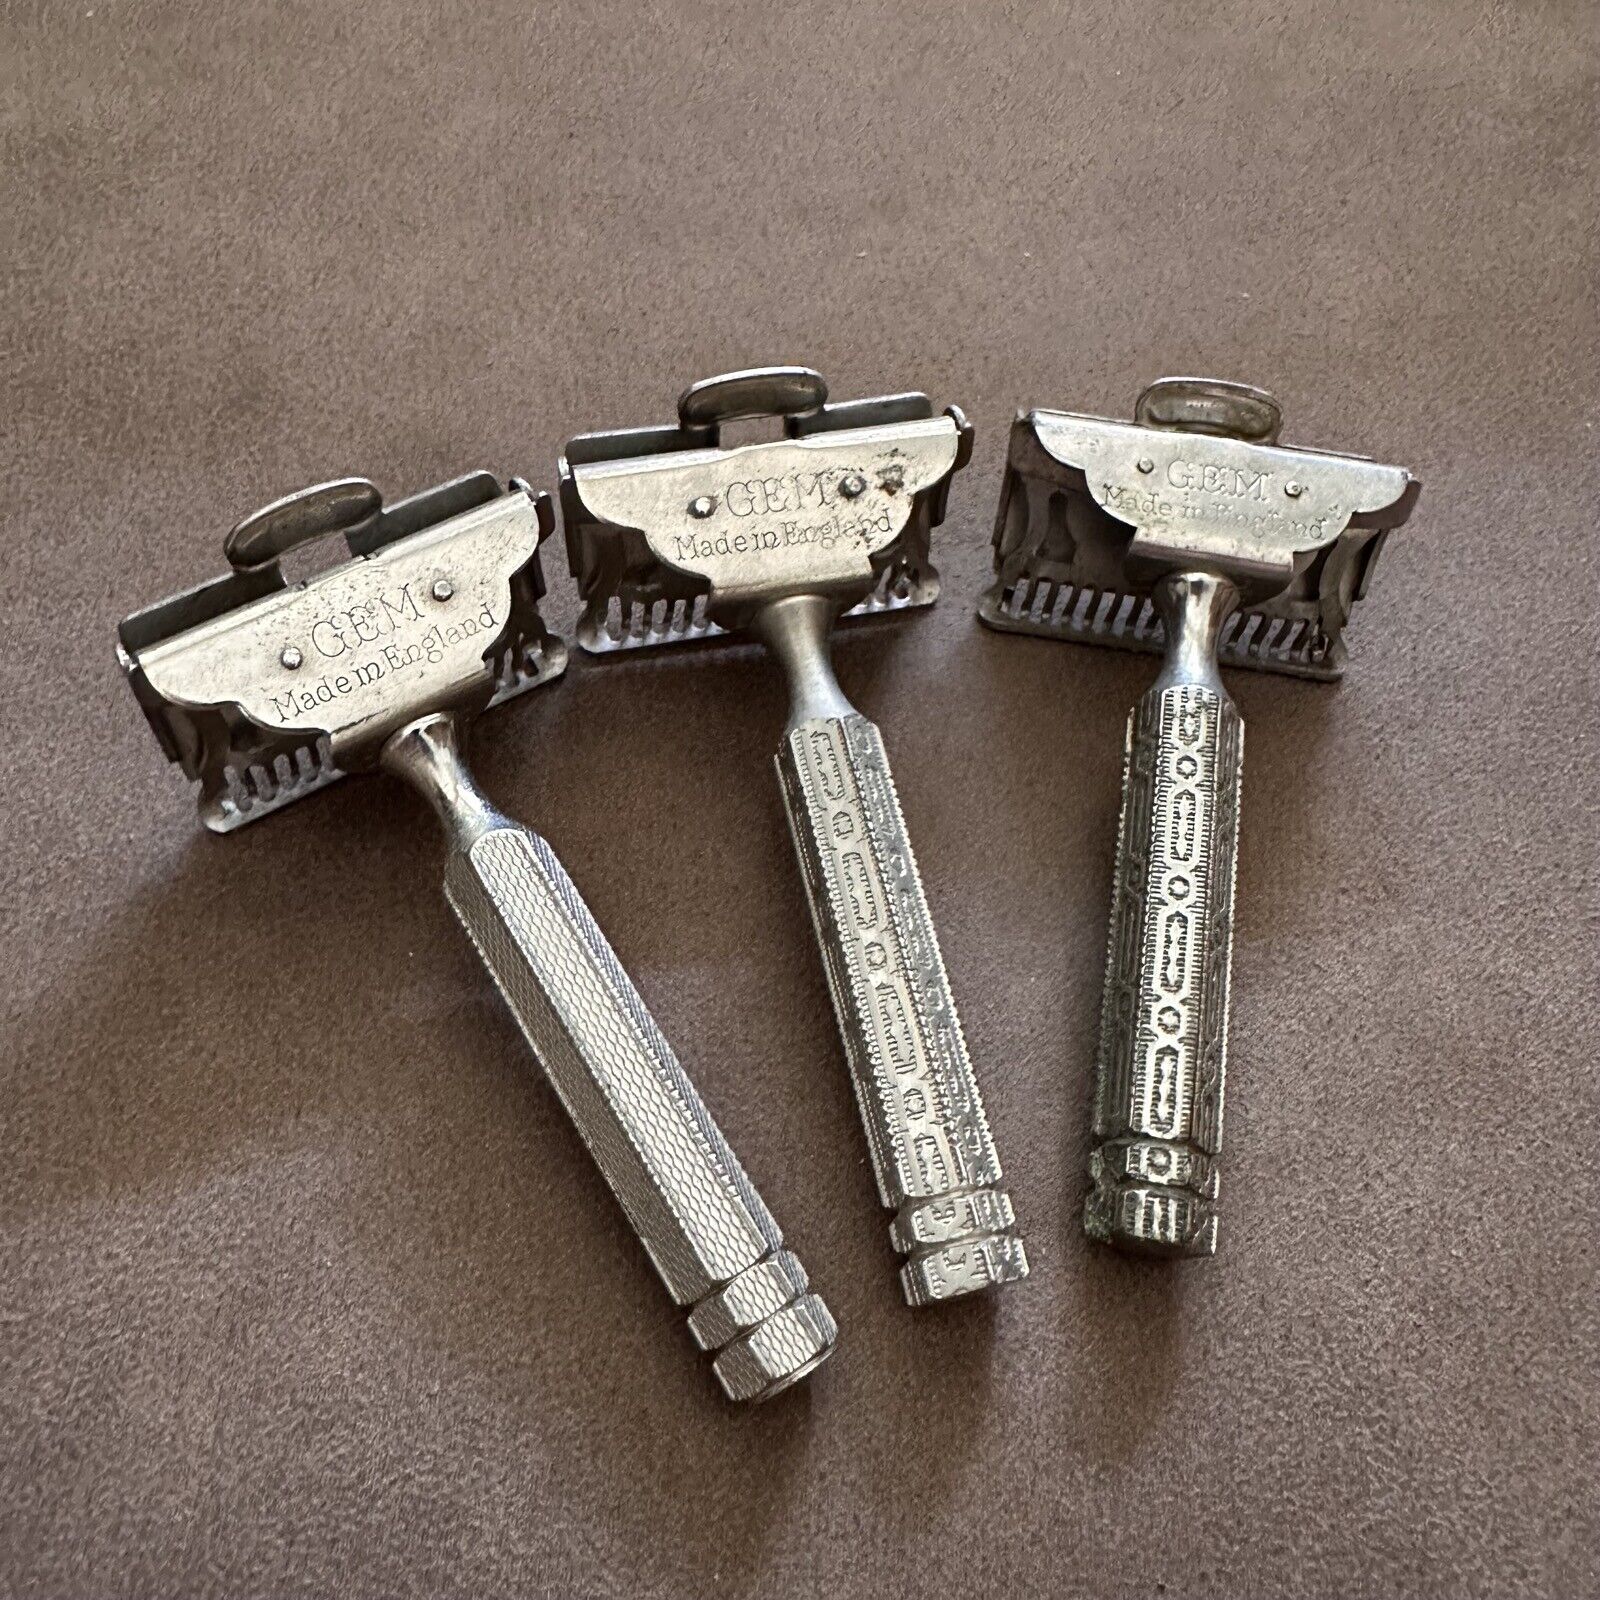 3x COLLECTABLE VINTAGE 'GEM' SHAVING SAFETY RAZOR MADE IN ENGLAND